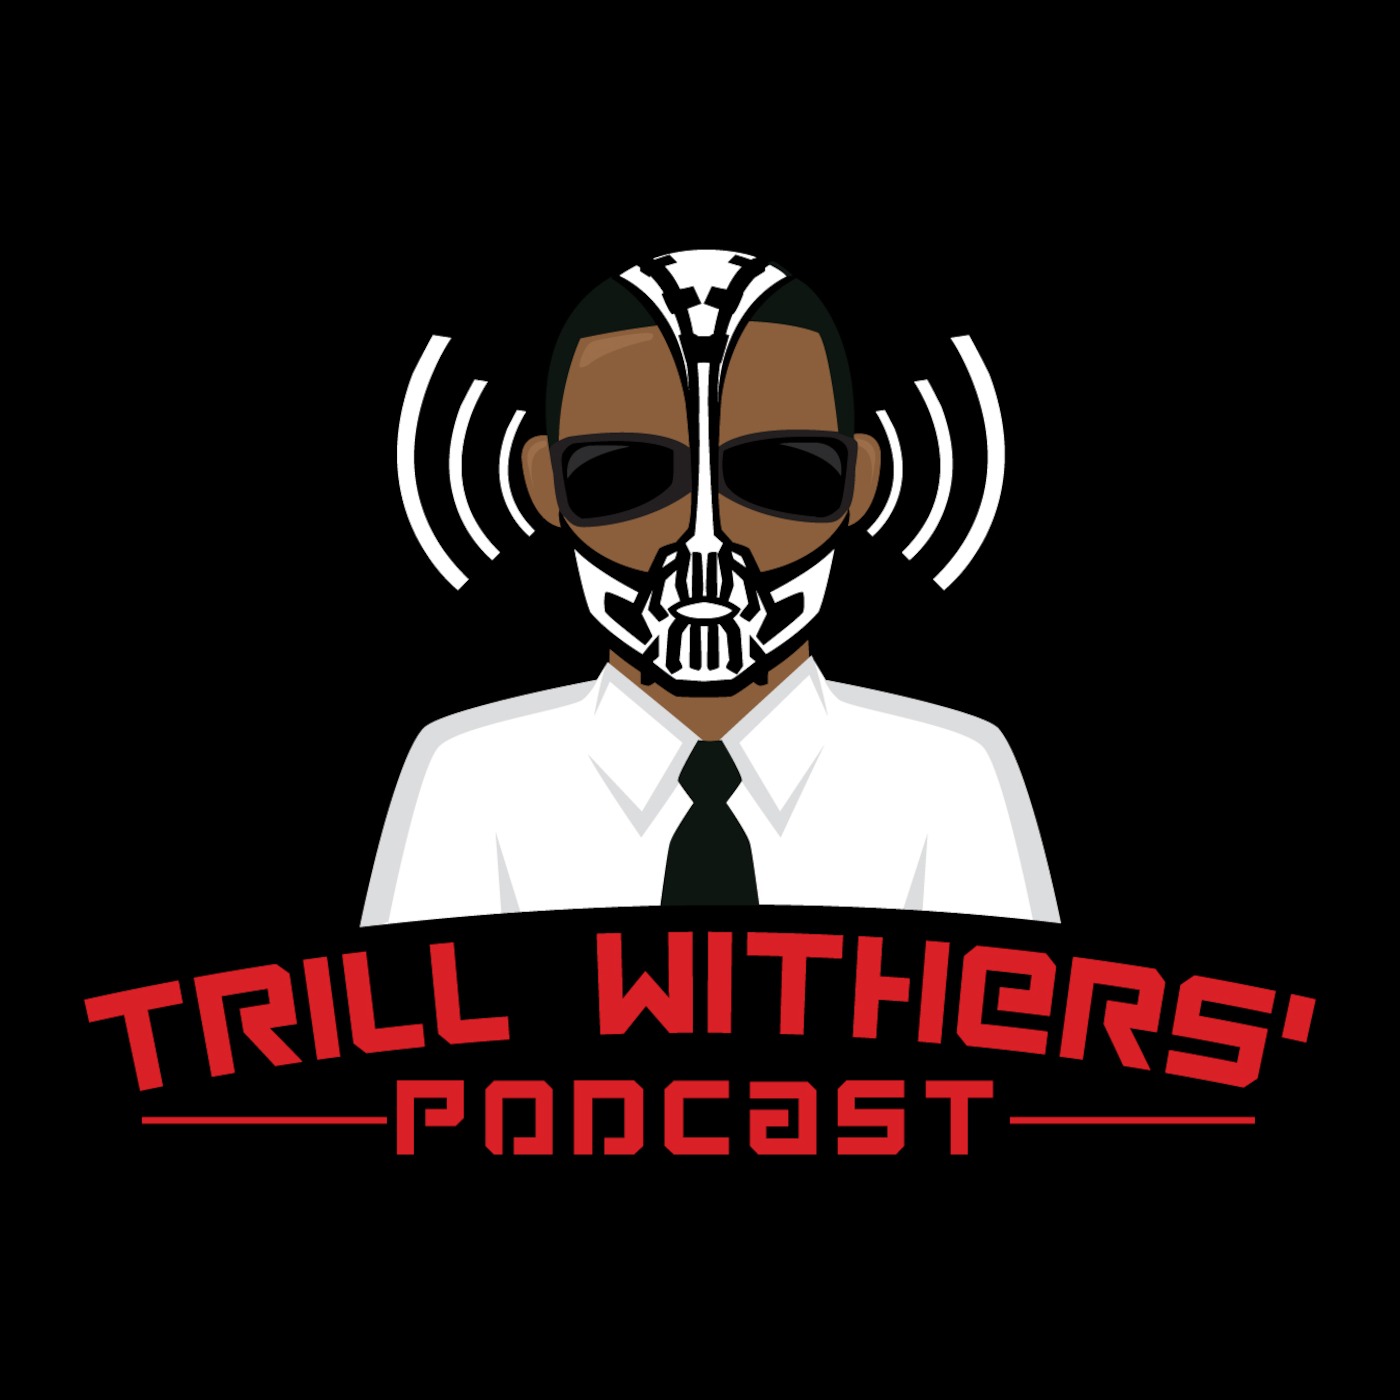 Trill Withers' Podcast